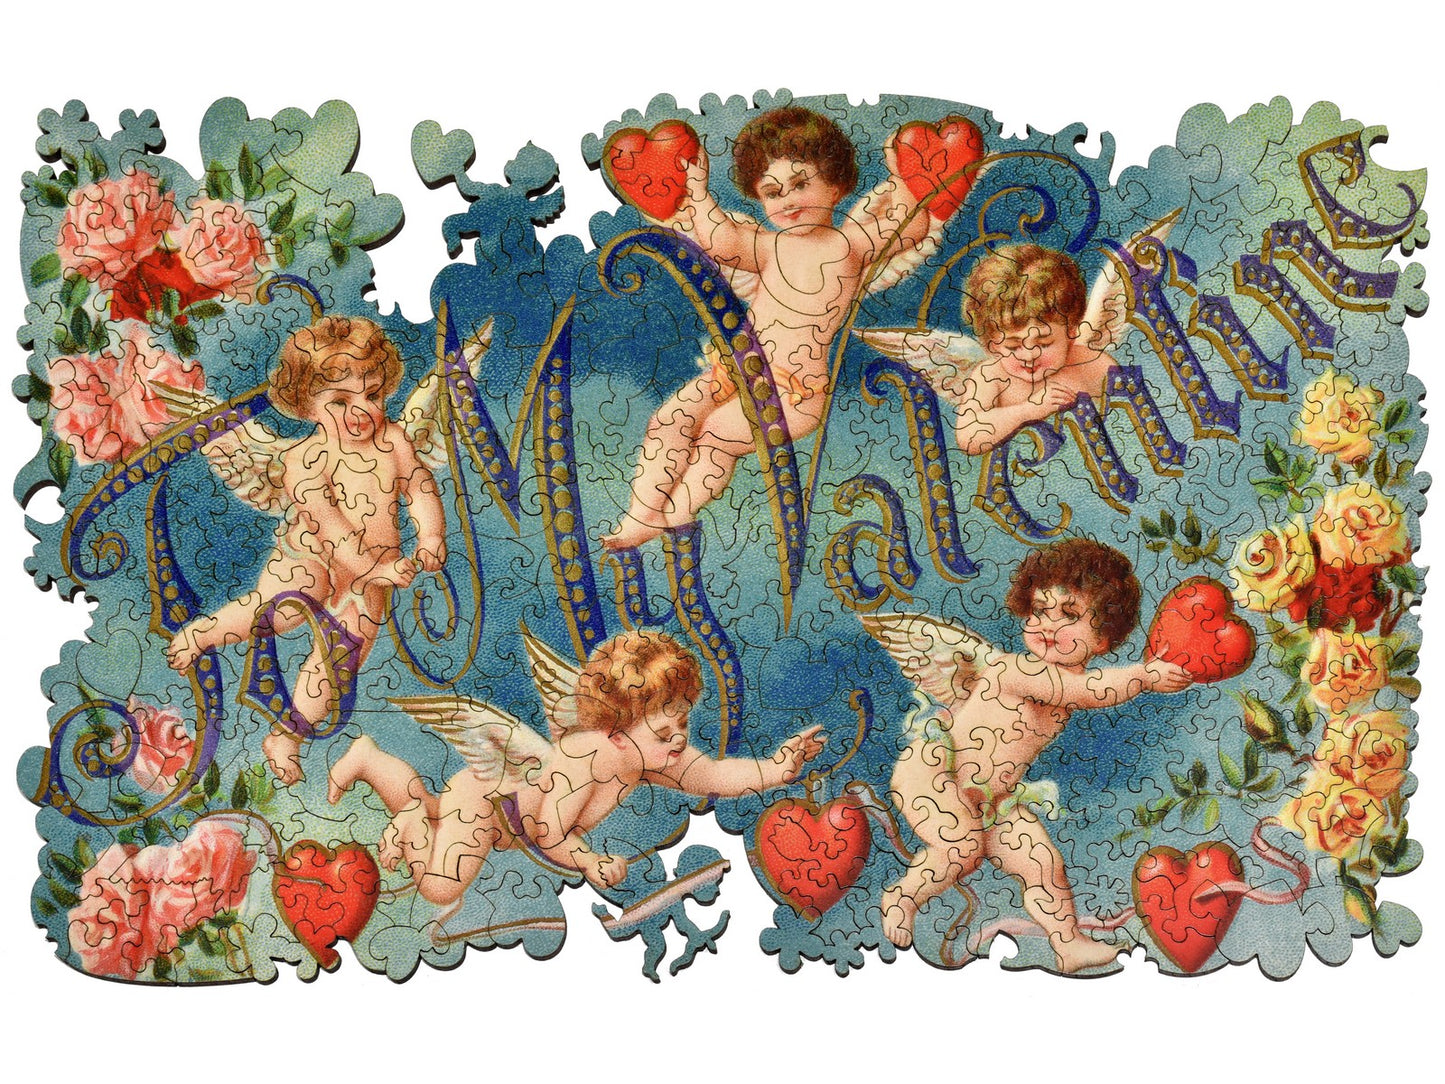 The front of the puzzle To My Valentine, which shows hearts and cherubs around the words "to my valentine".